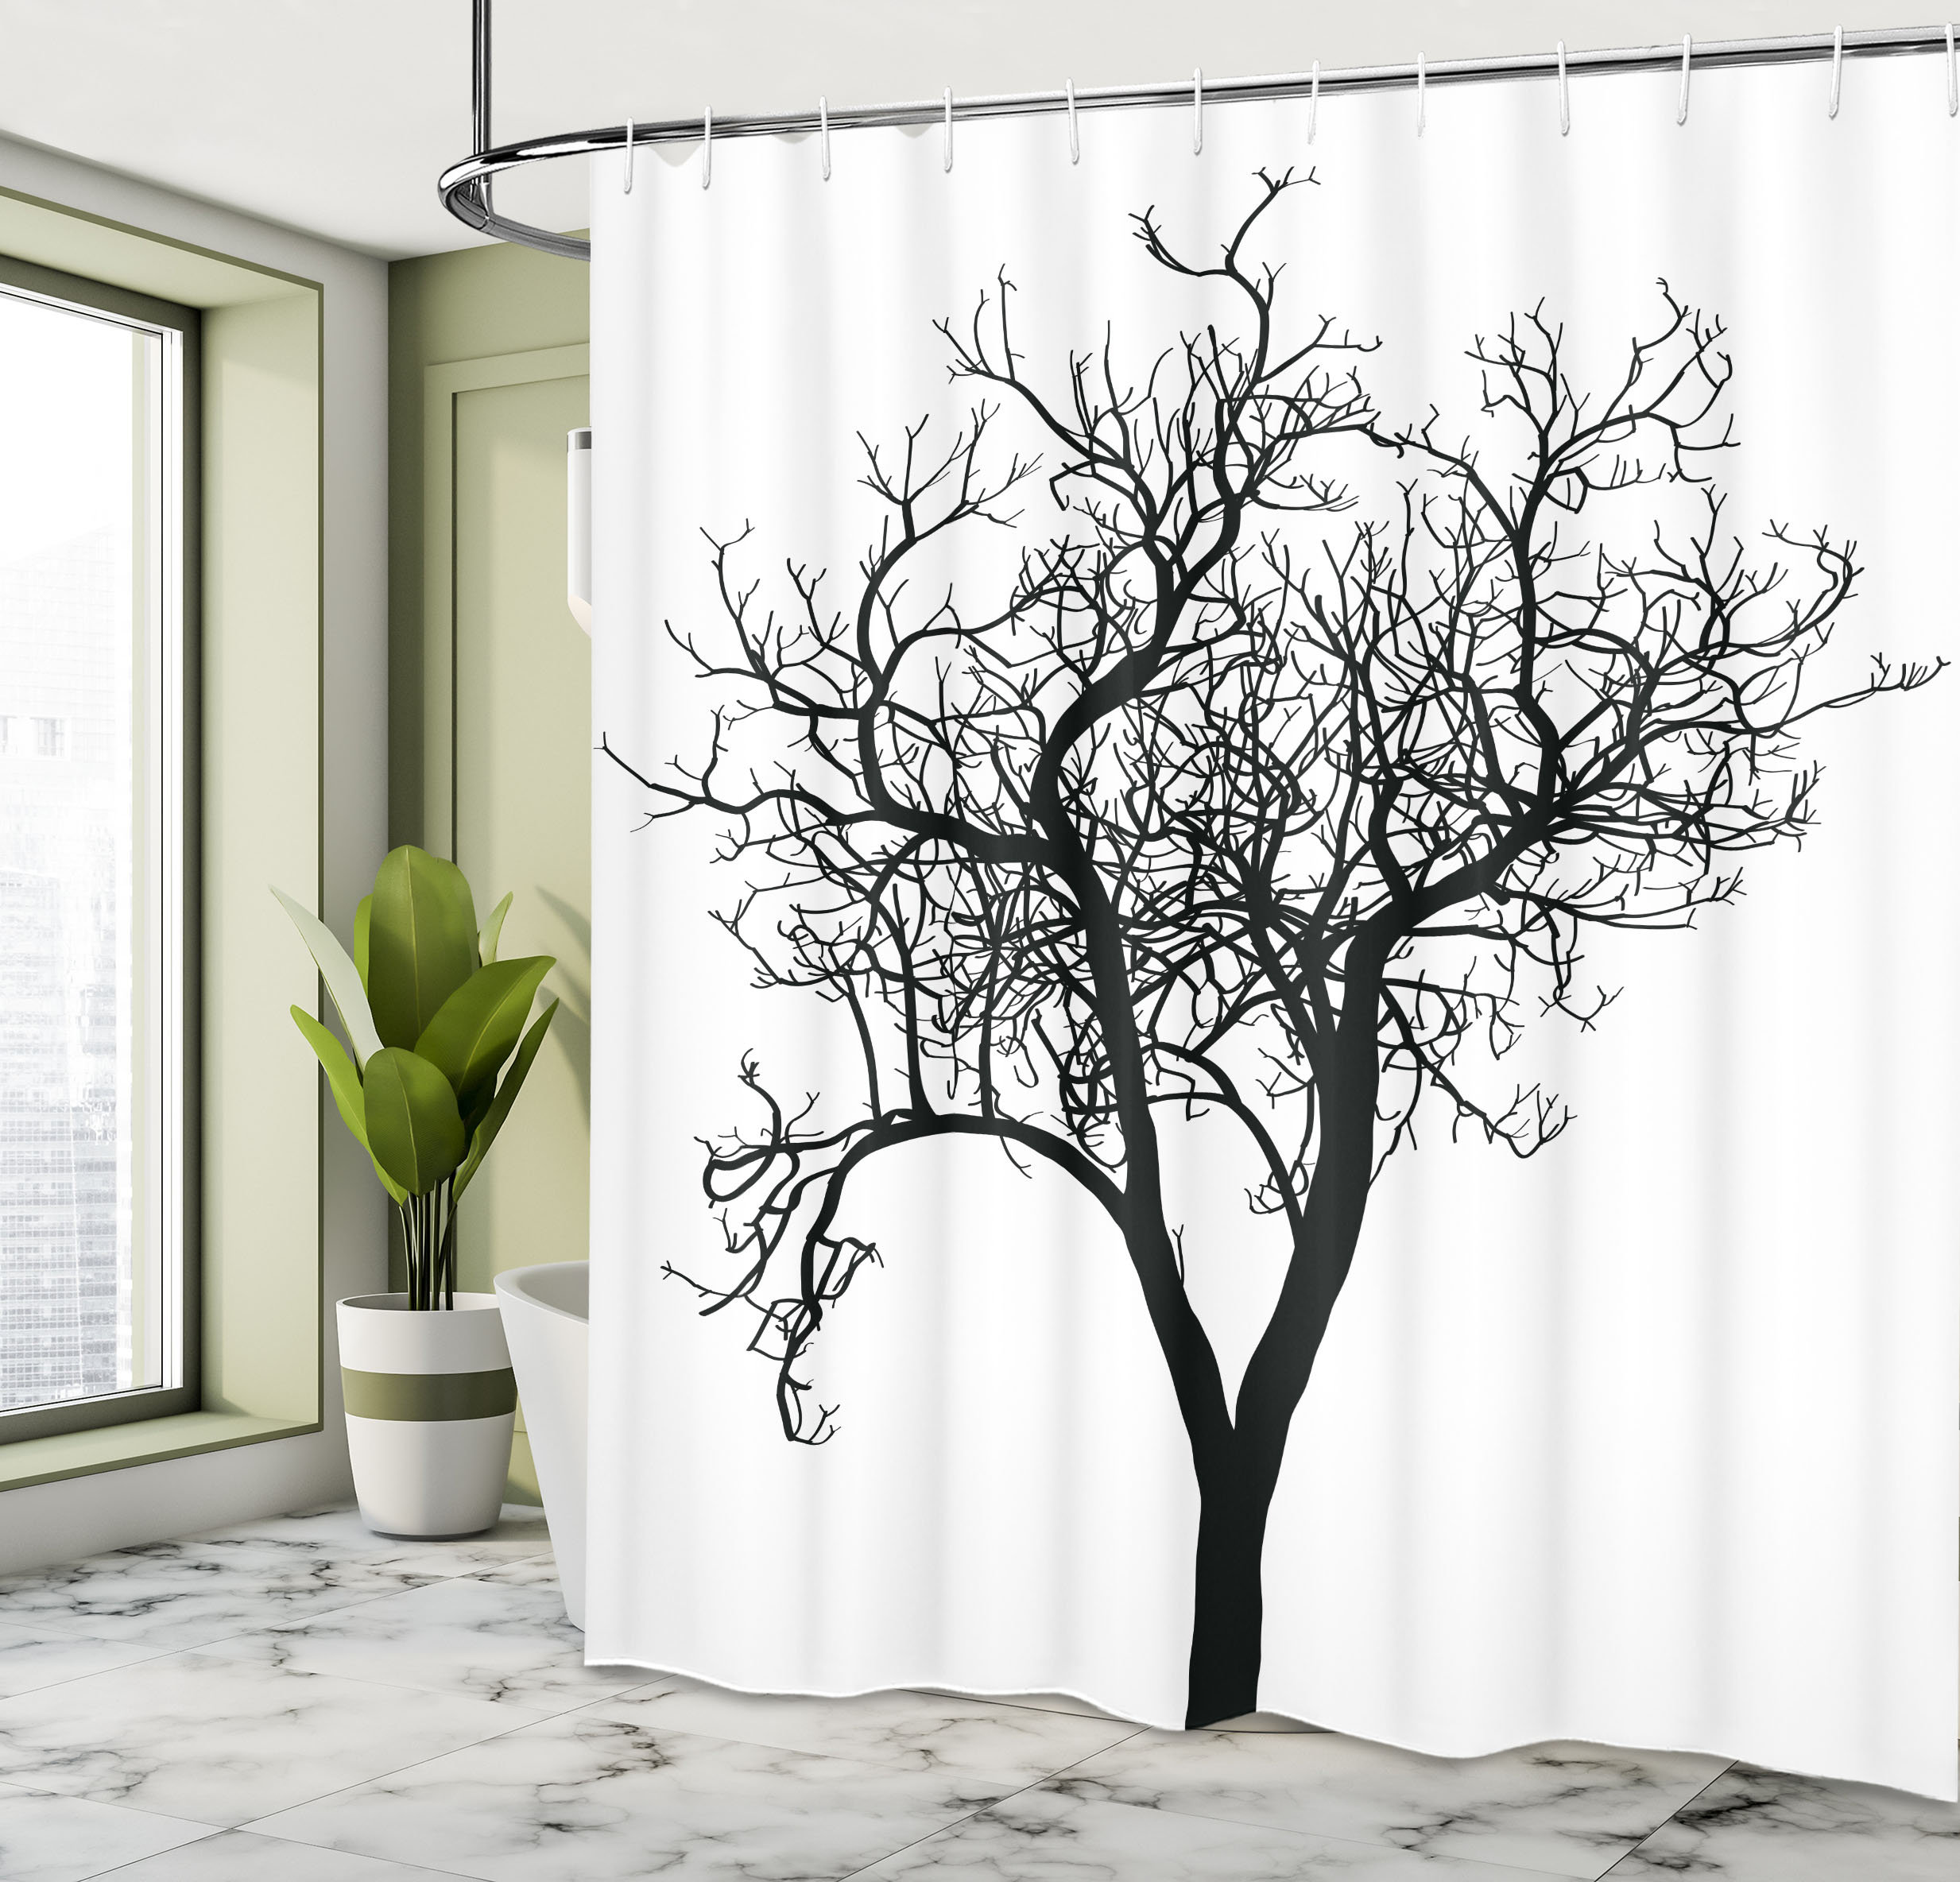 Lonely Tree Shower Curtain Set + Hooks East Urban Home Size: 75 H x 69 W